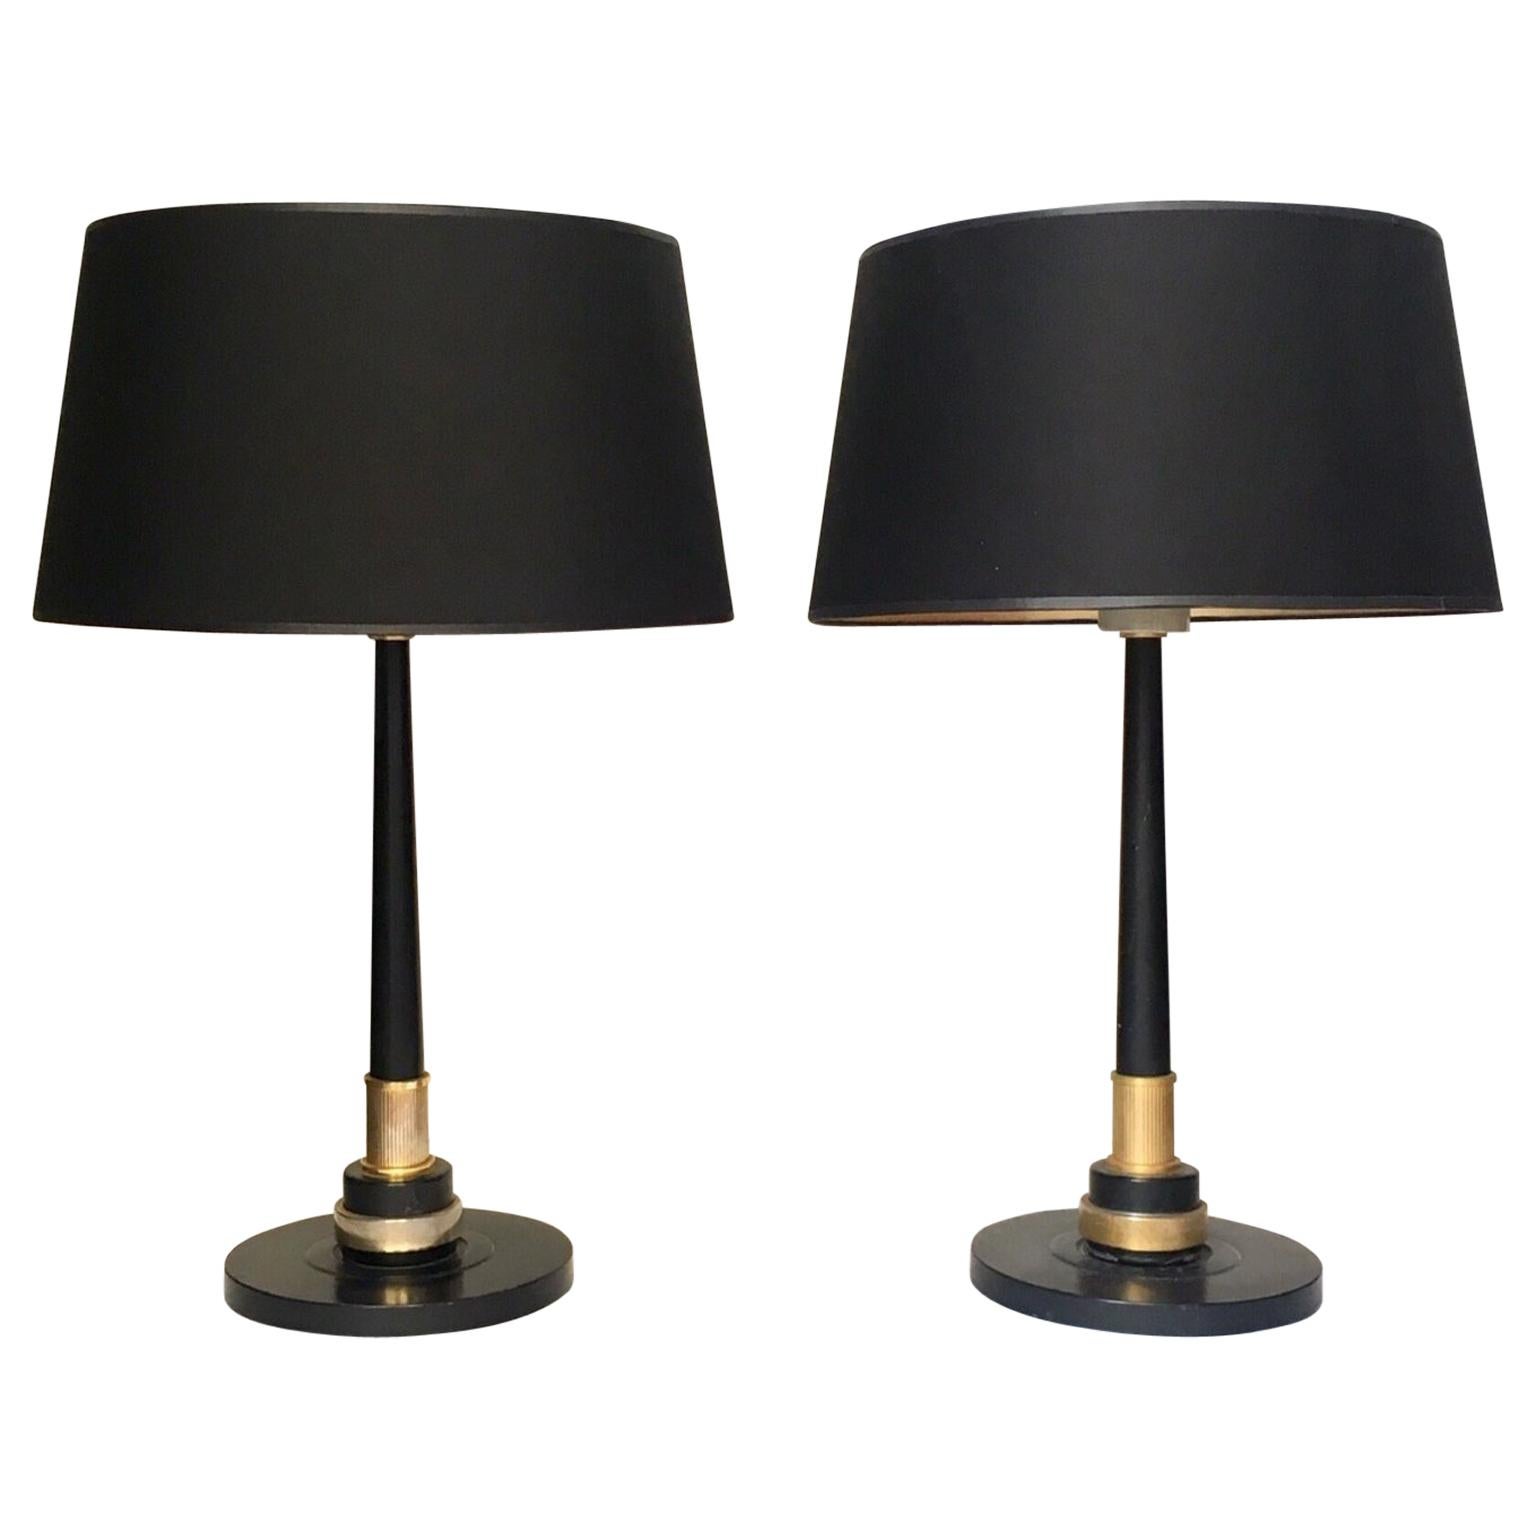 Pair of French Brass and Lacquered Metal "Jumo" Table Lamps